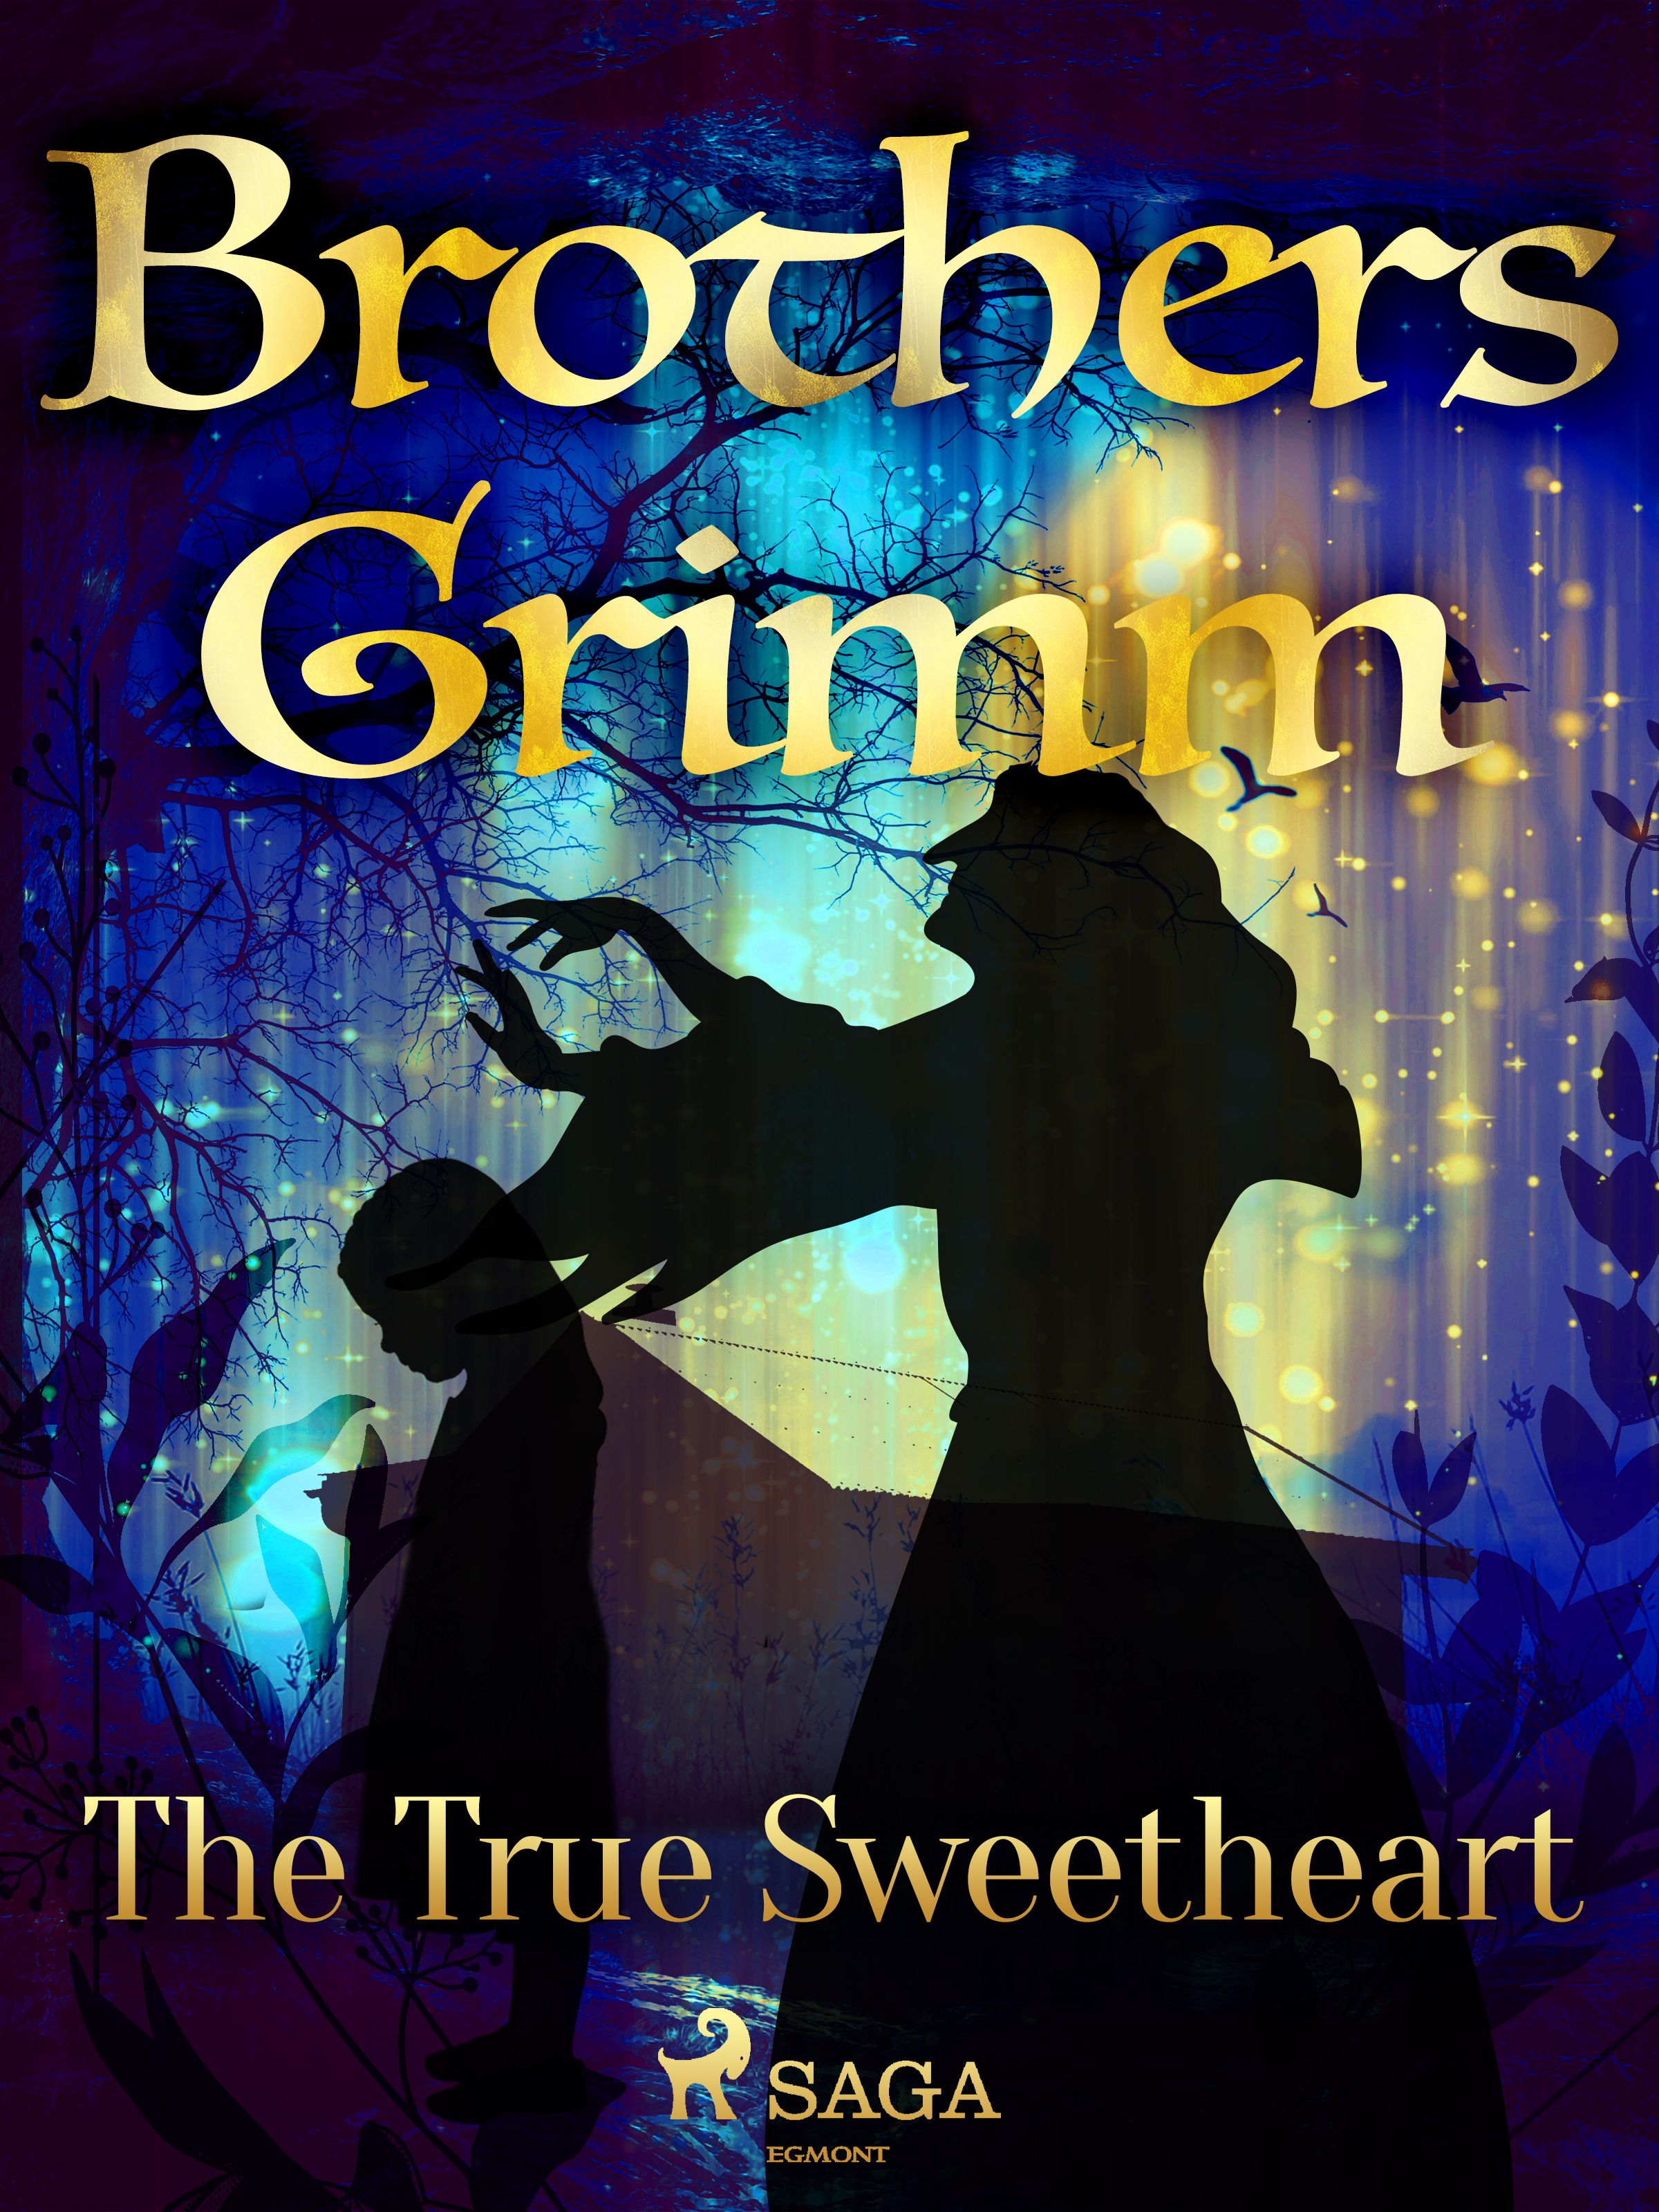 The True Sweetheart, eBook by Brothers Grimm